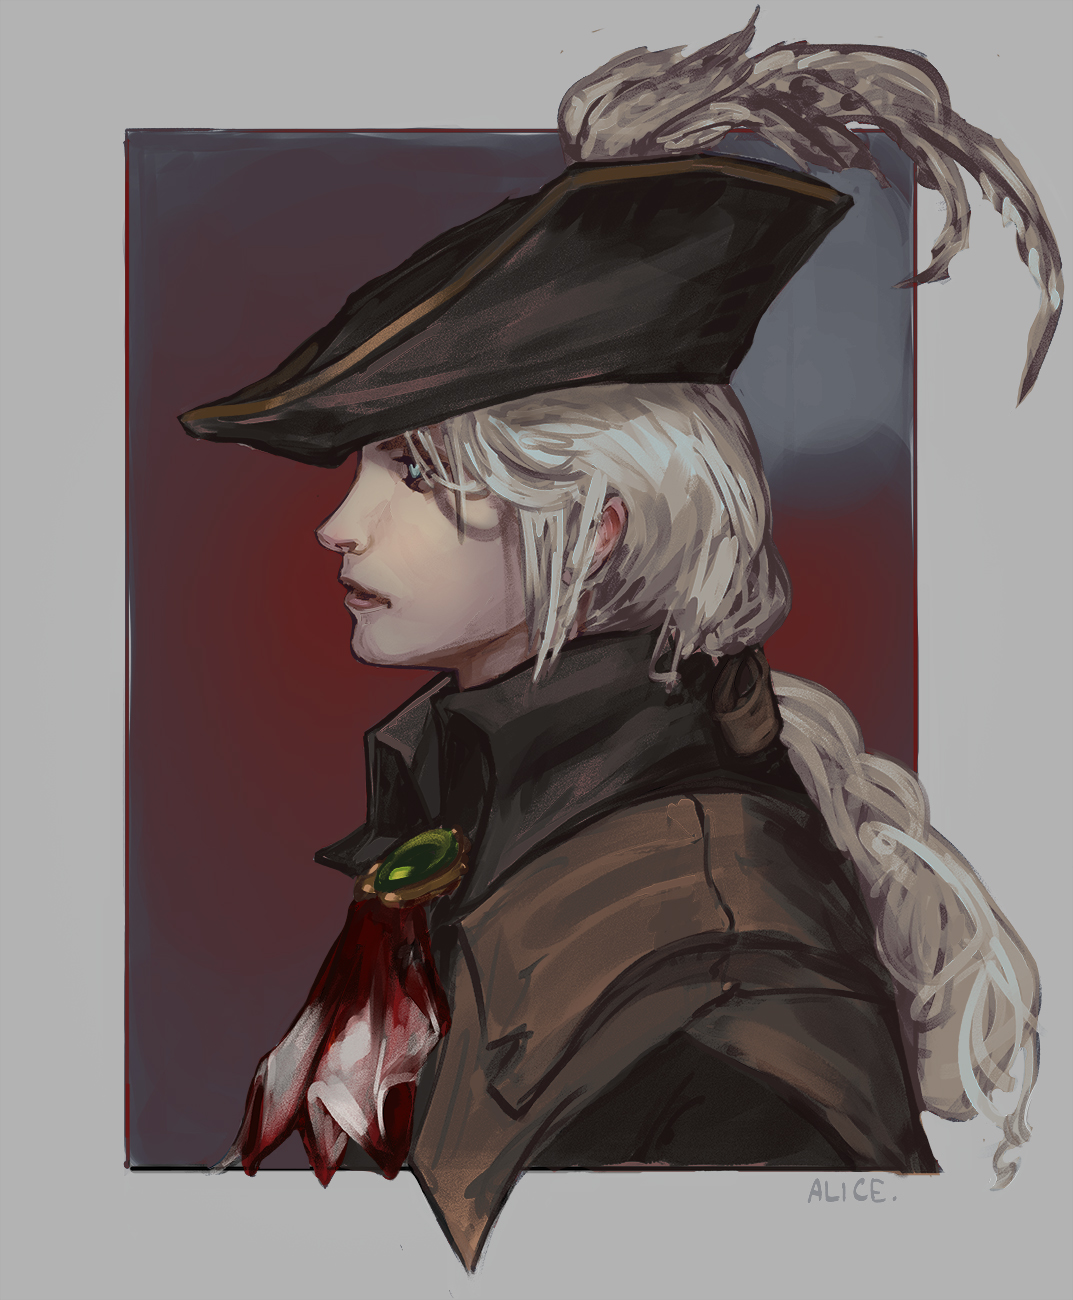 Image of Lady Maria from Bloodborne.